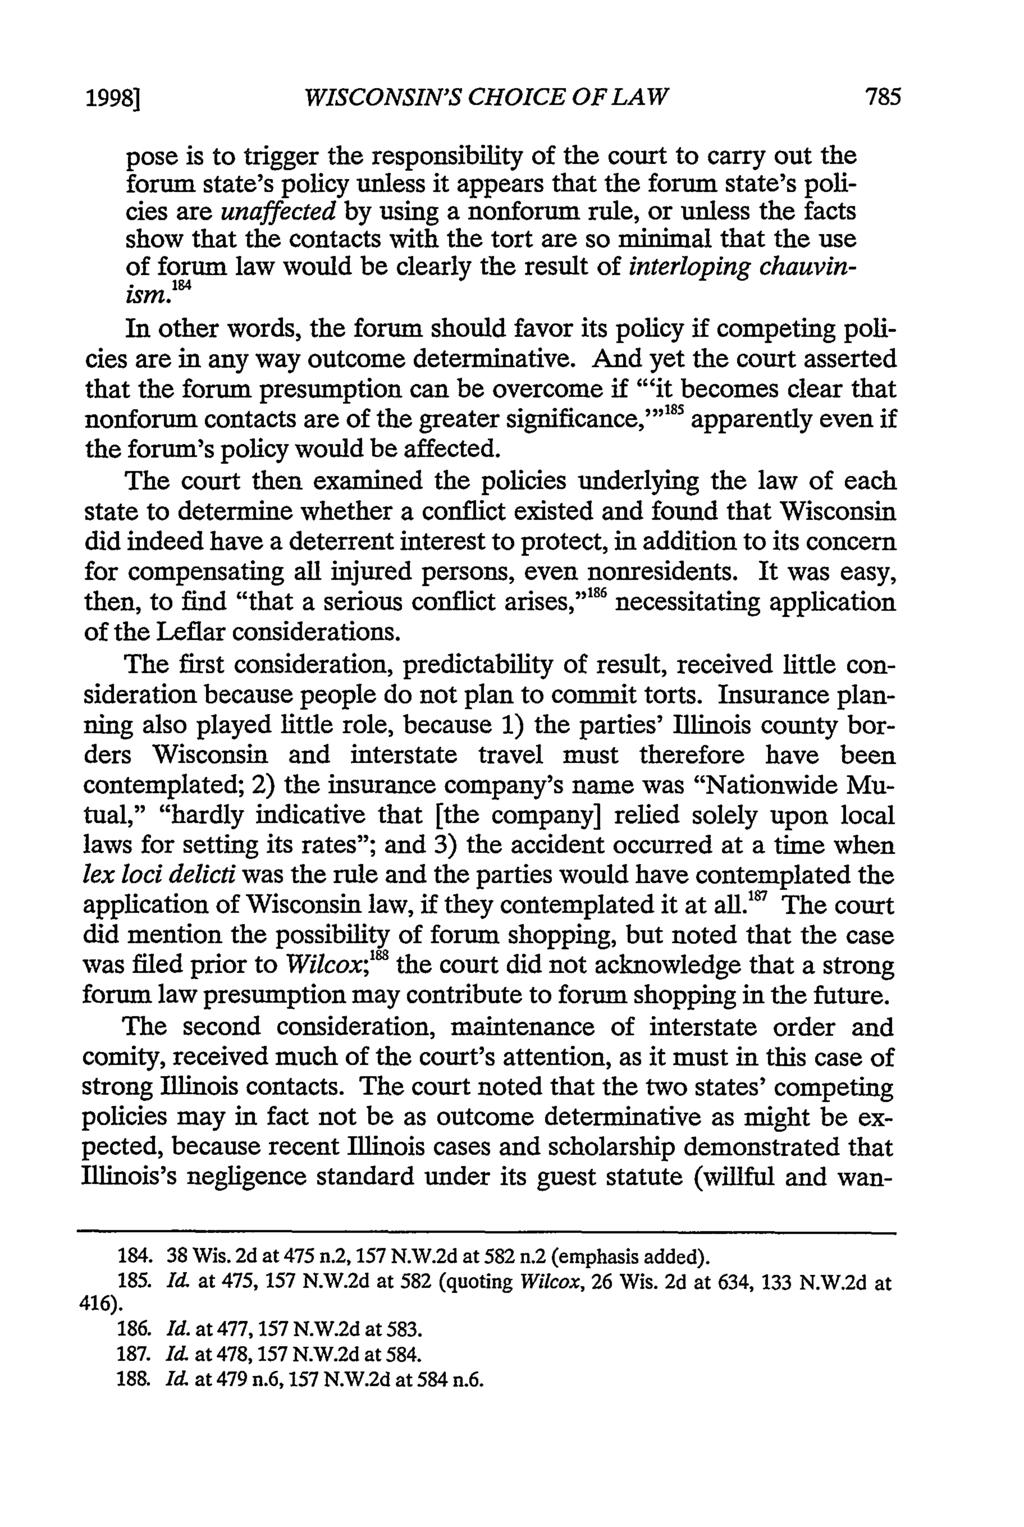 1998] WISCONSIN'S CHOICE OF LAW pose is to trigger the responsibility of the court to carry out the forum state's policy unless it appears that the forum state's policies are unaffected by using a